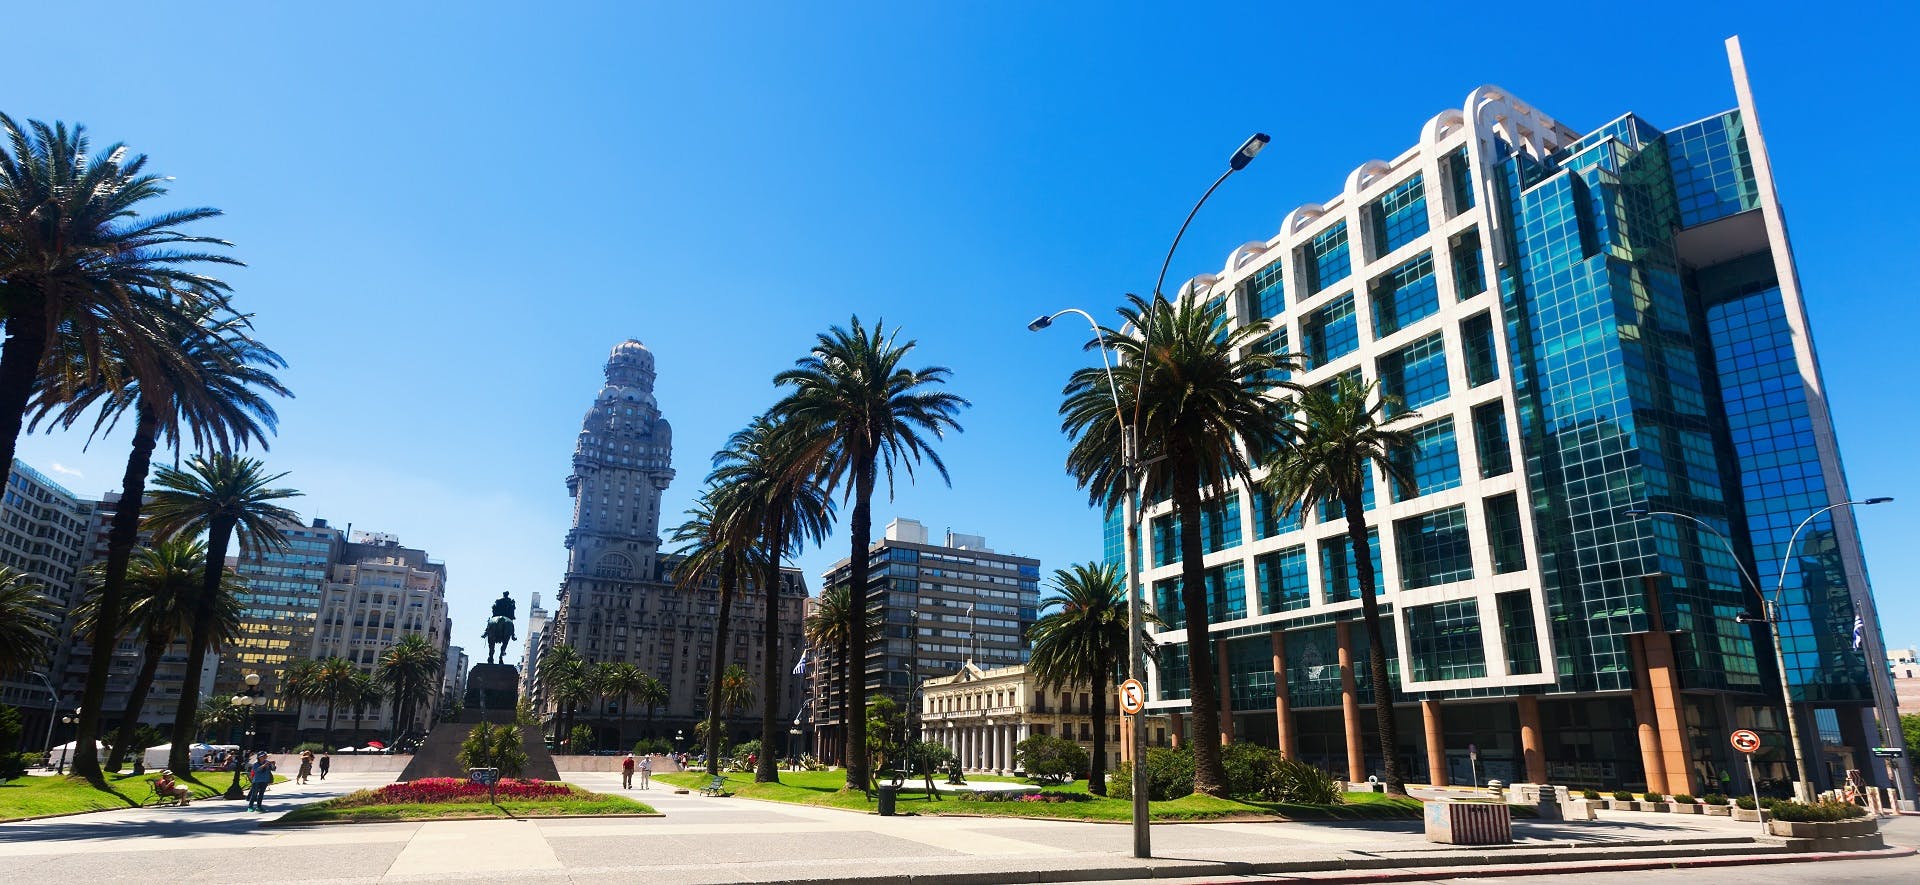 Full-day tour to Montevideo from Buenos Aires